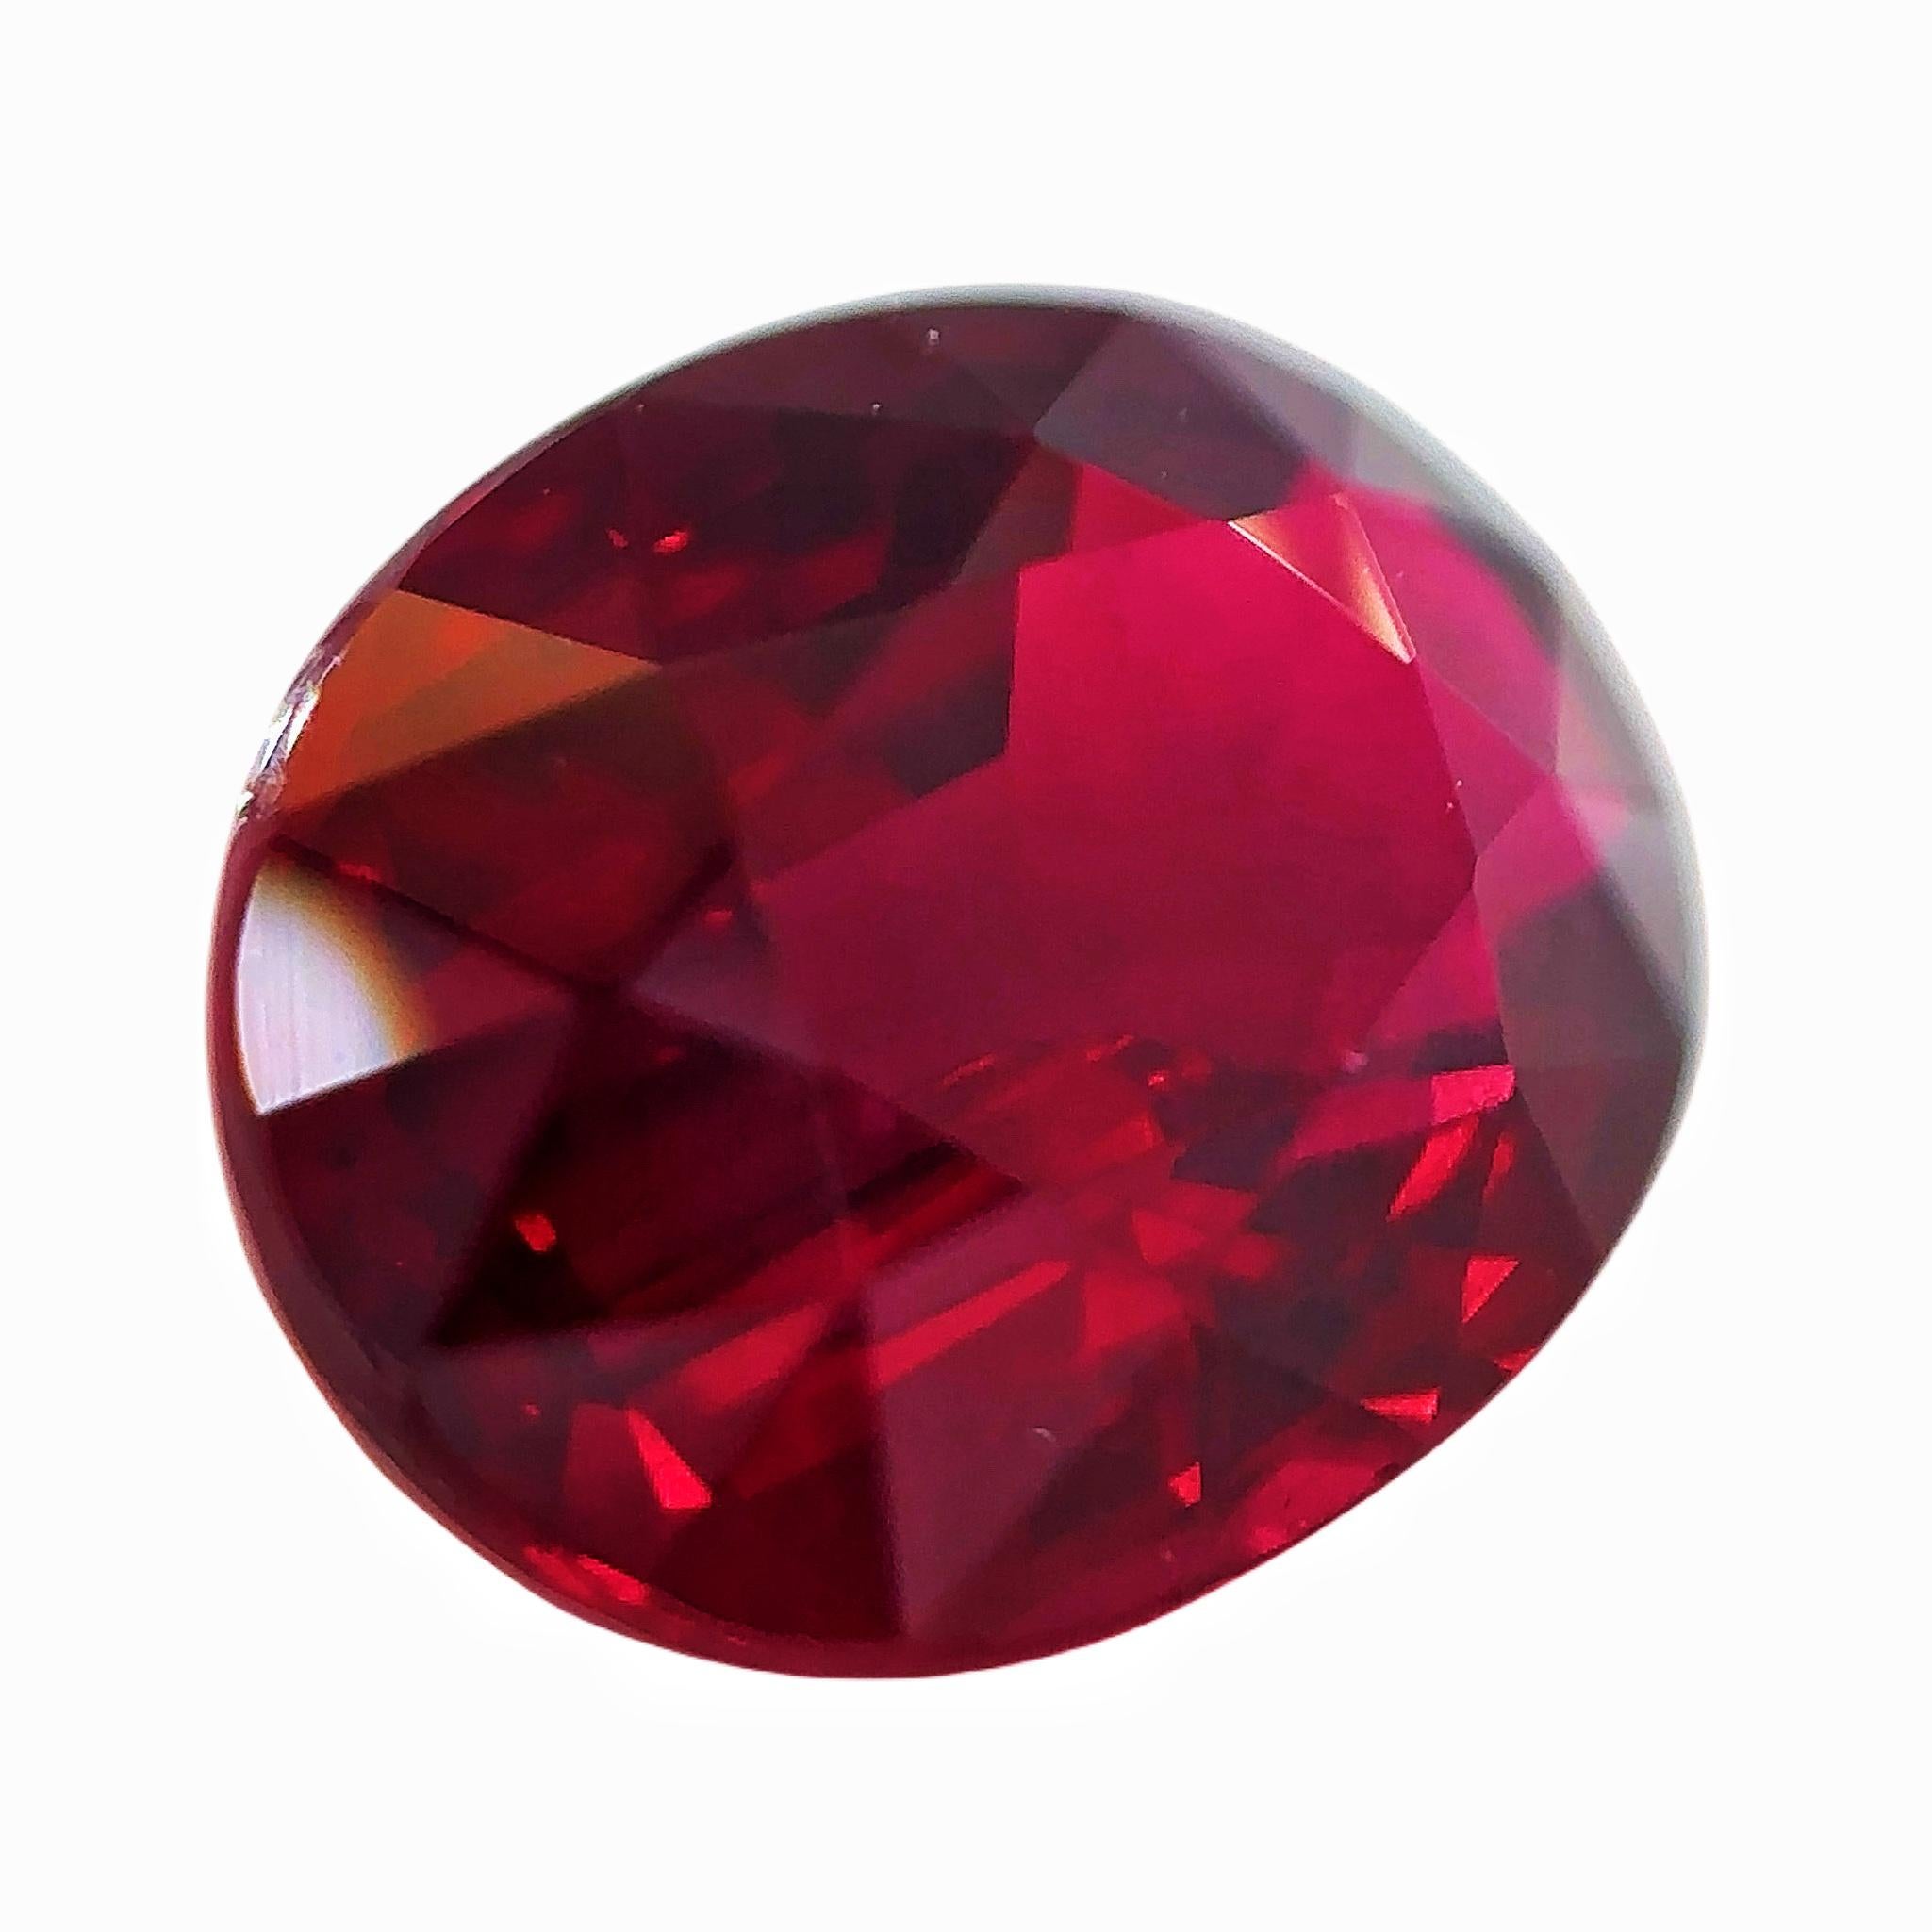 GRS Certified 3.03 Carat Natural Unheated Mozambique Ruby Loose Stone

This Item is ideal for your design as an engagement ring, cocktail ring, necklace, bracelet, etc.

Come with a GRS lab report.

ABOUT US  

Xuelai Jewellery London is a